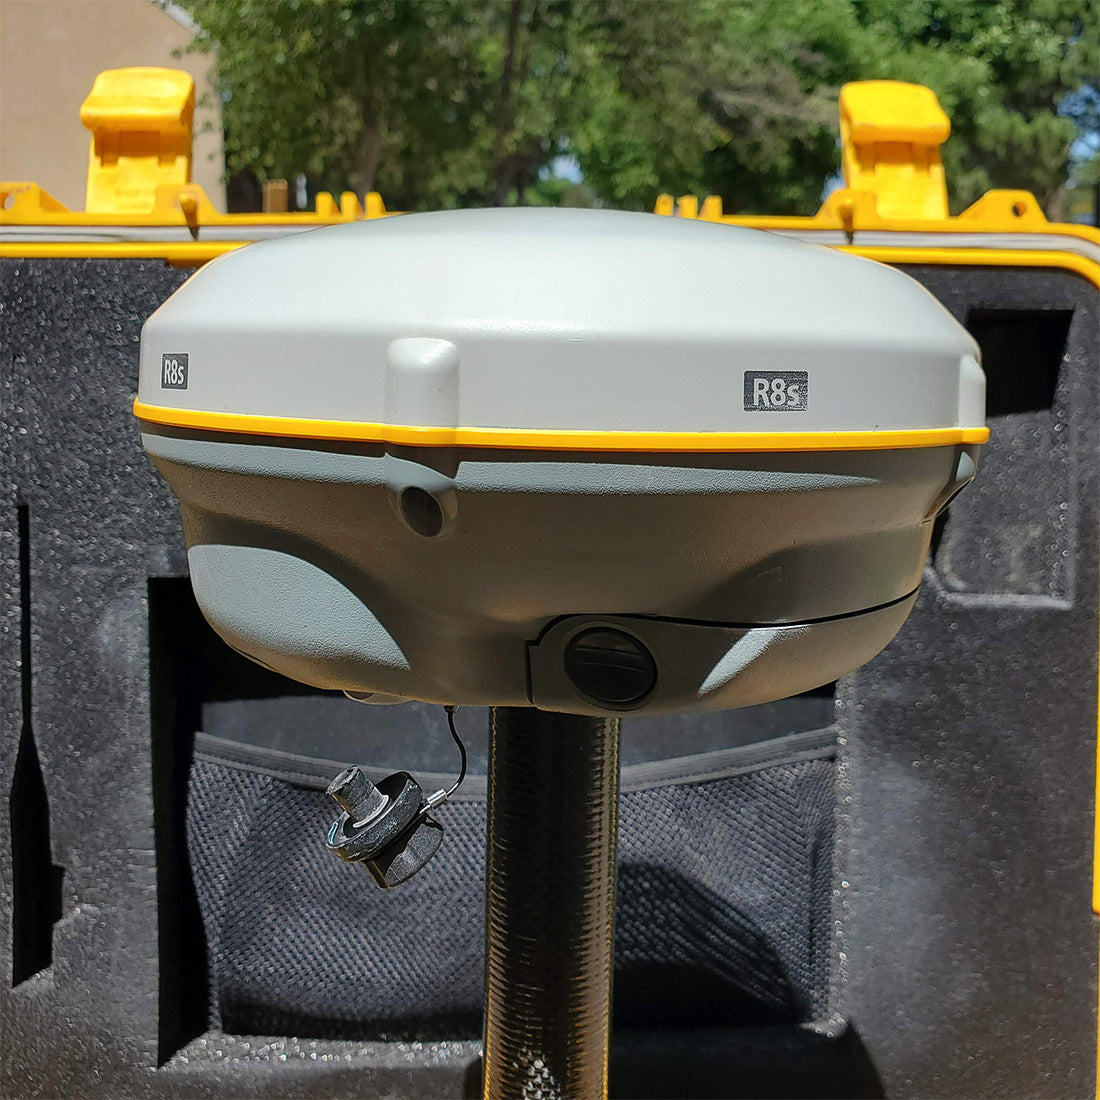 USED Trimble R8s GNSS Base Only Receiver, Dual Frequency